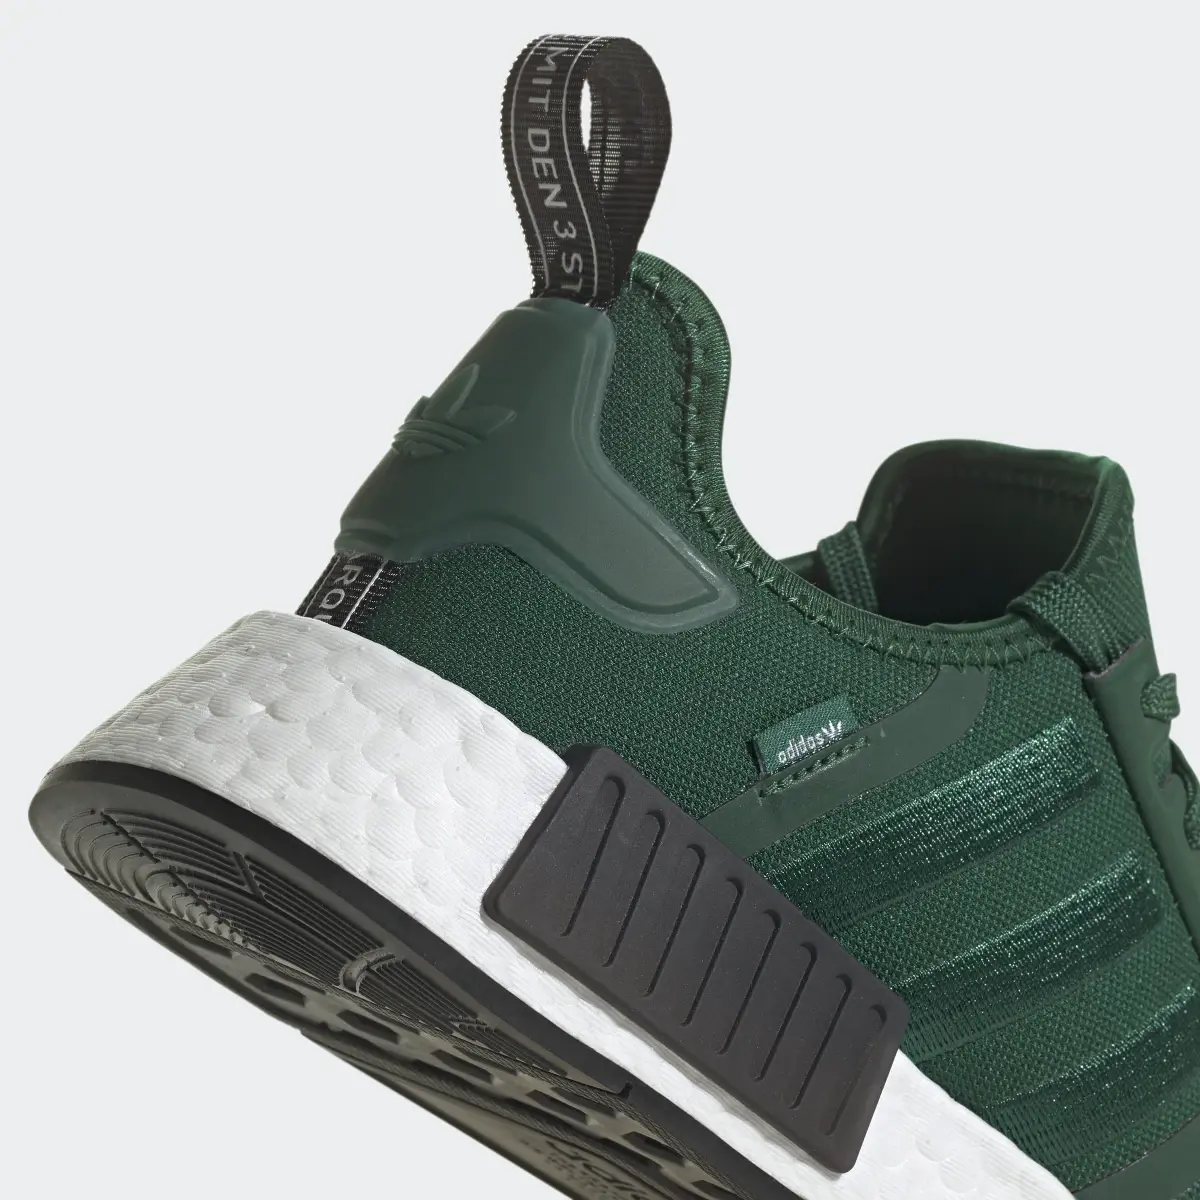 Adidas NMD_R1 Shoes. 3